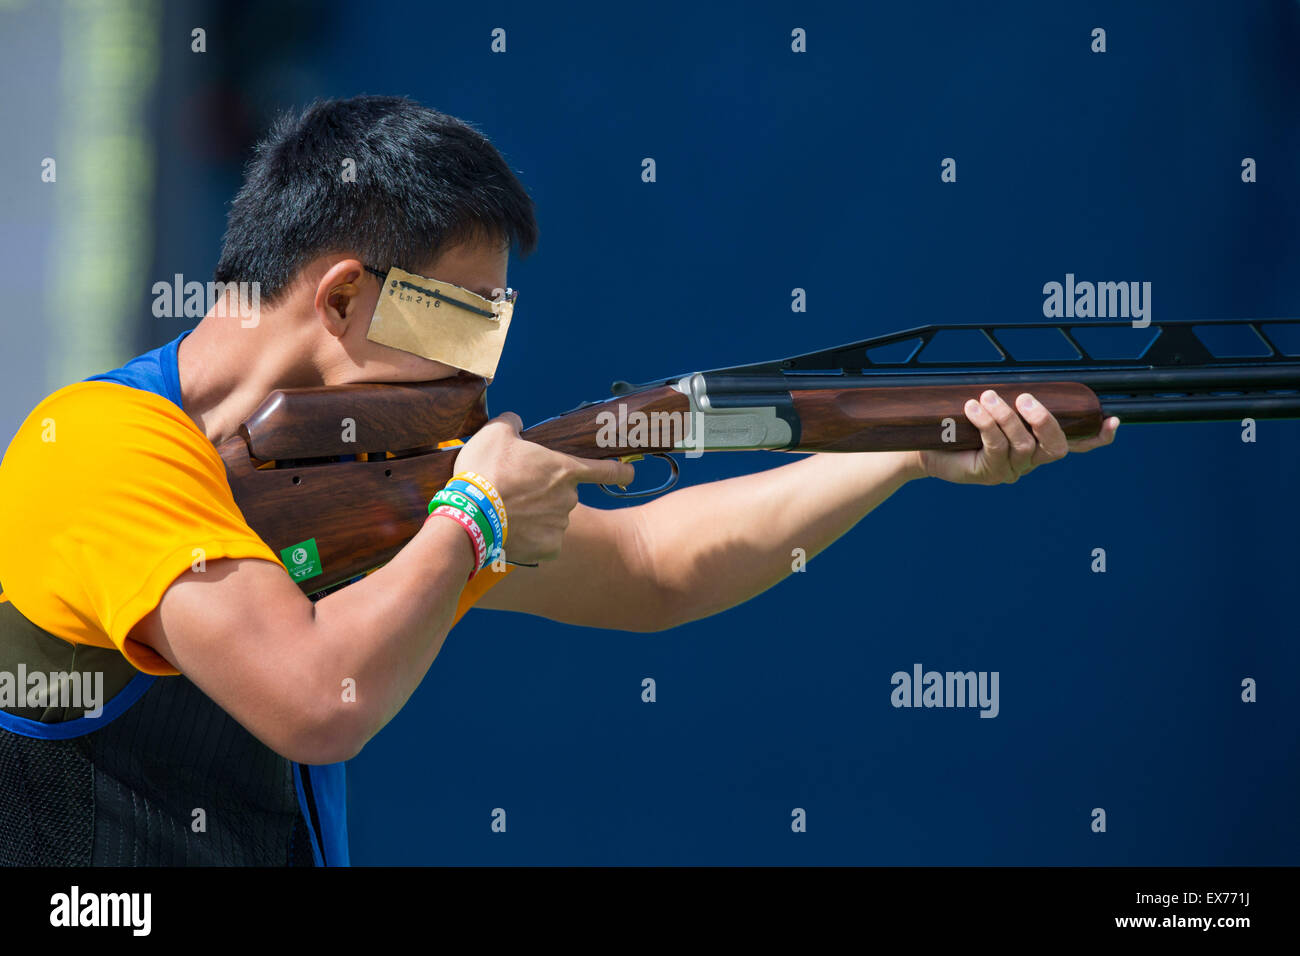 Malaysia's Benjamin Khor competing at the Barry Buddon Shooting Centre during the Glasgow Commonwealth Games on July 27, 2014. Stock Photo